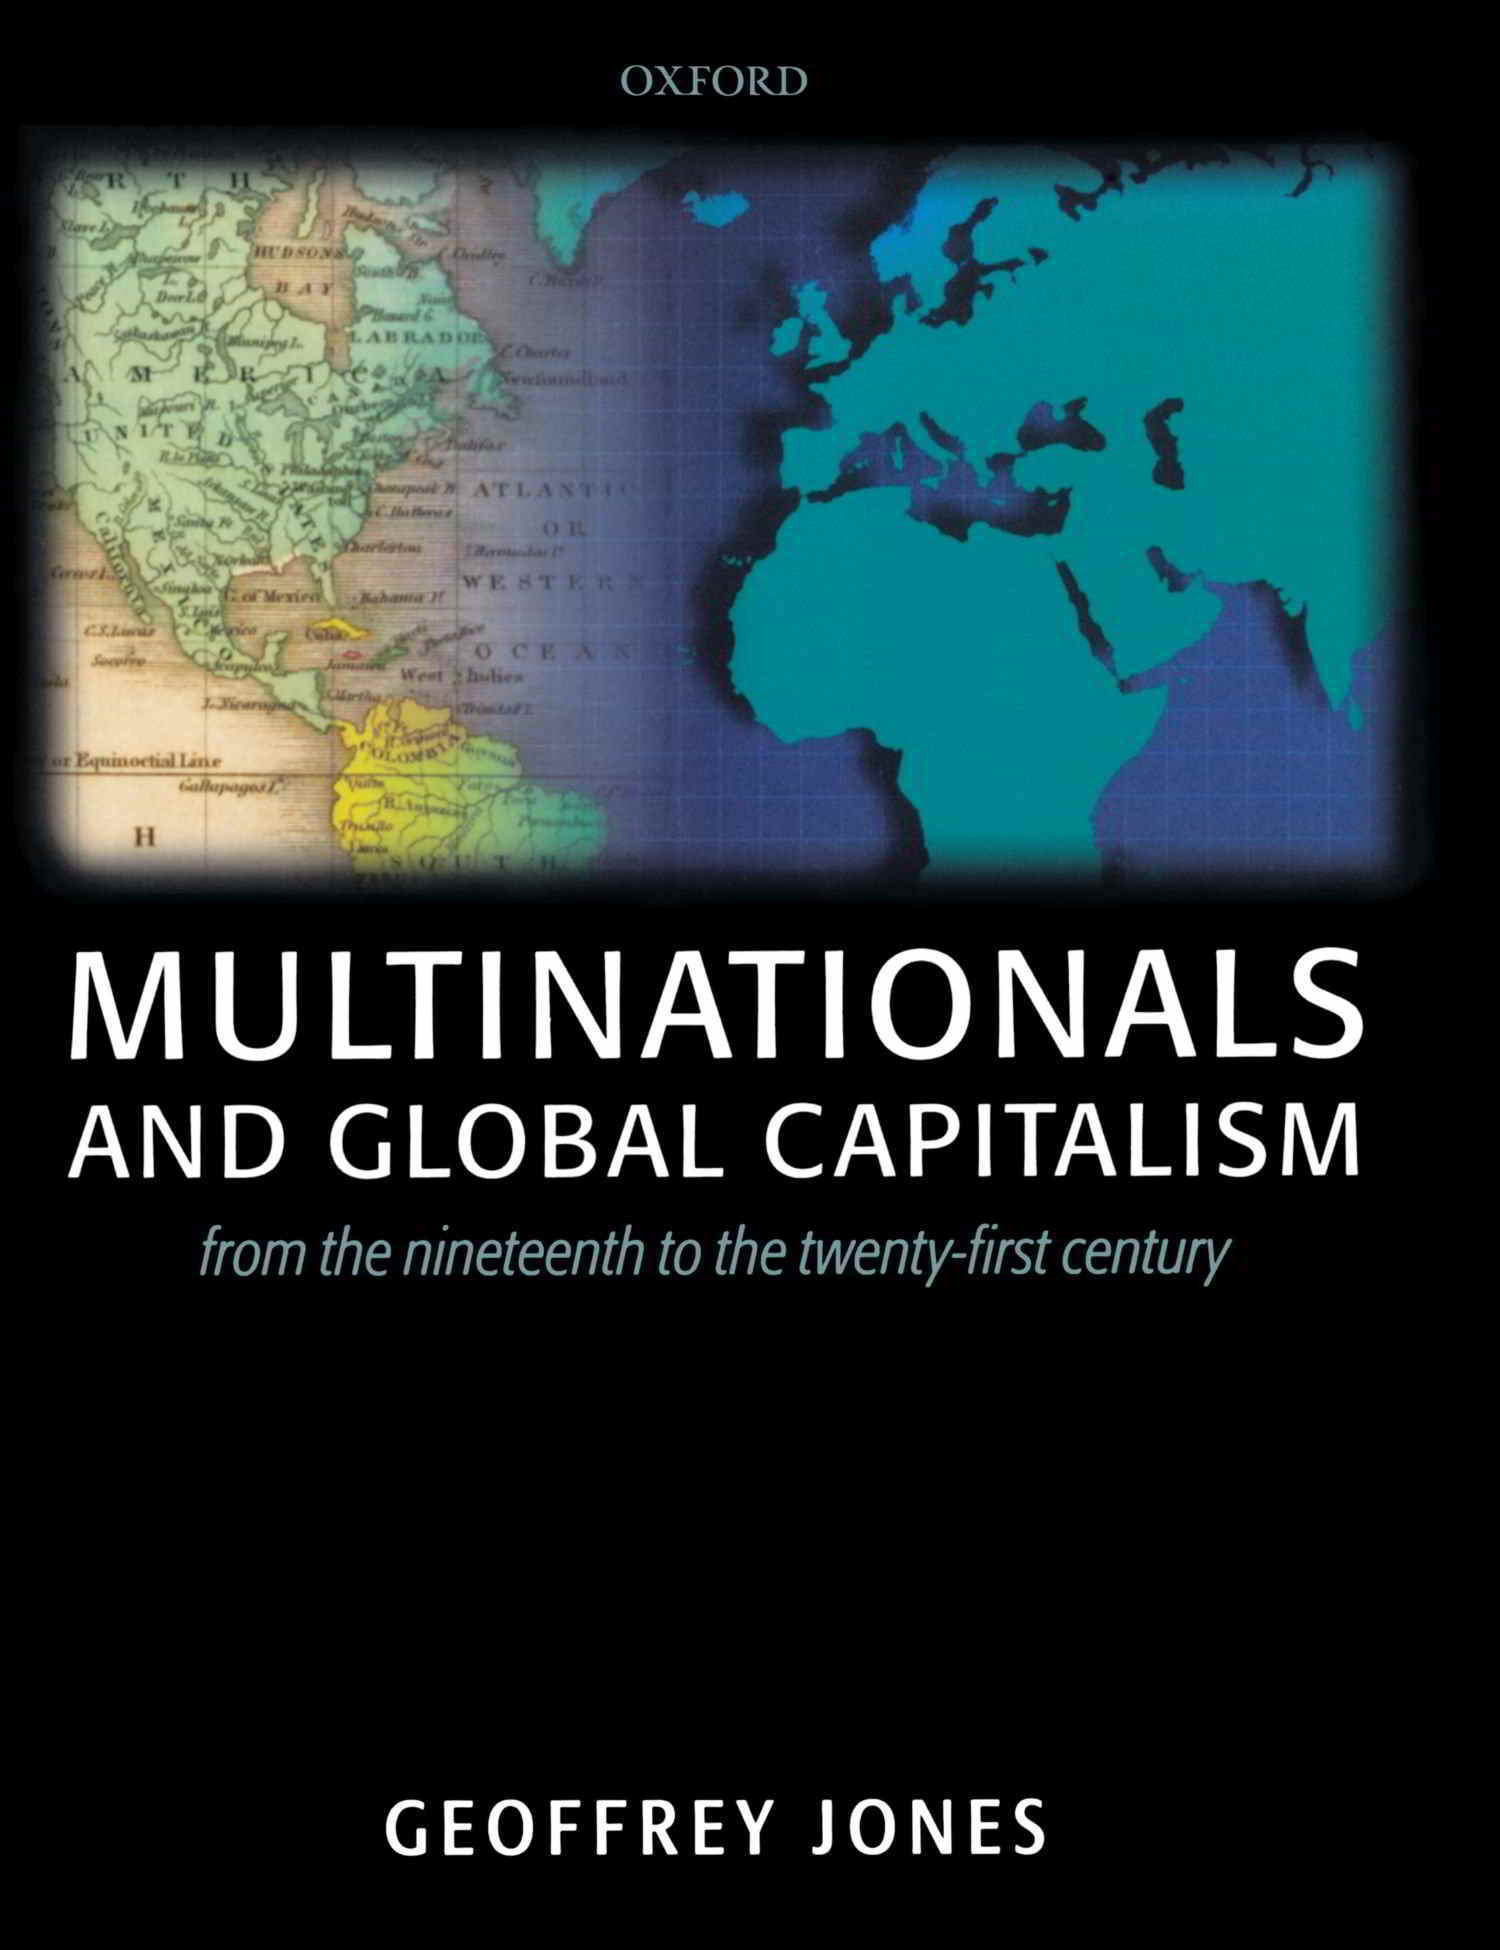 “Multinationals And Global Capitalism: From the Nineteenth to the Twenty-first Century” di Geoffrey Jones, 2004.